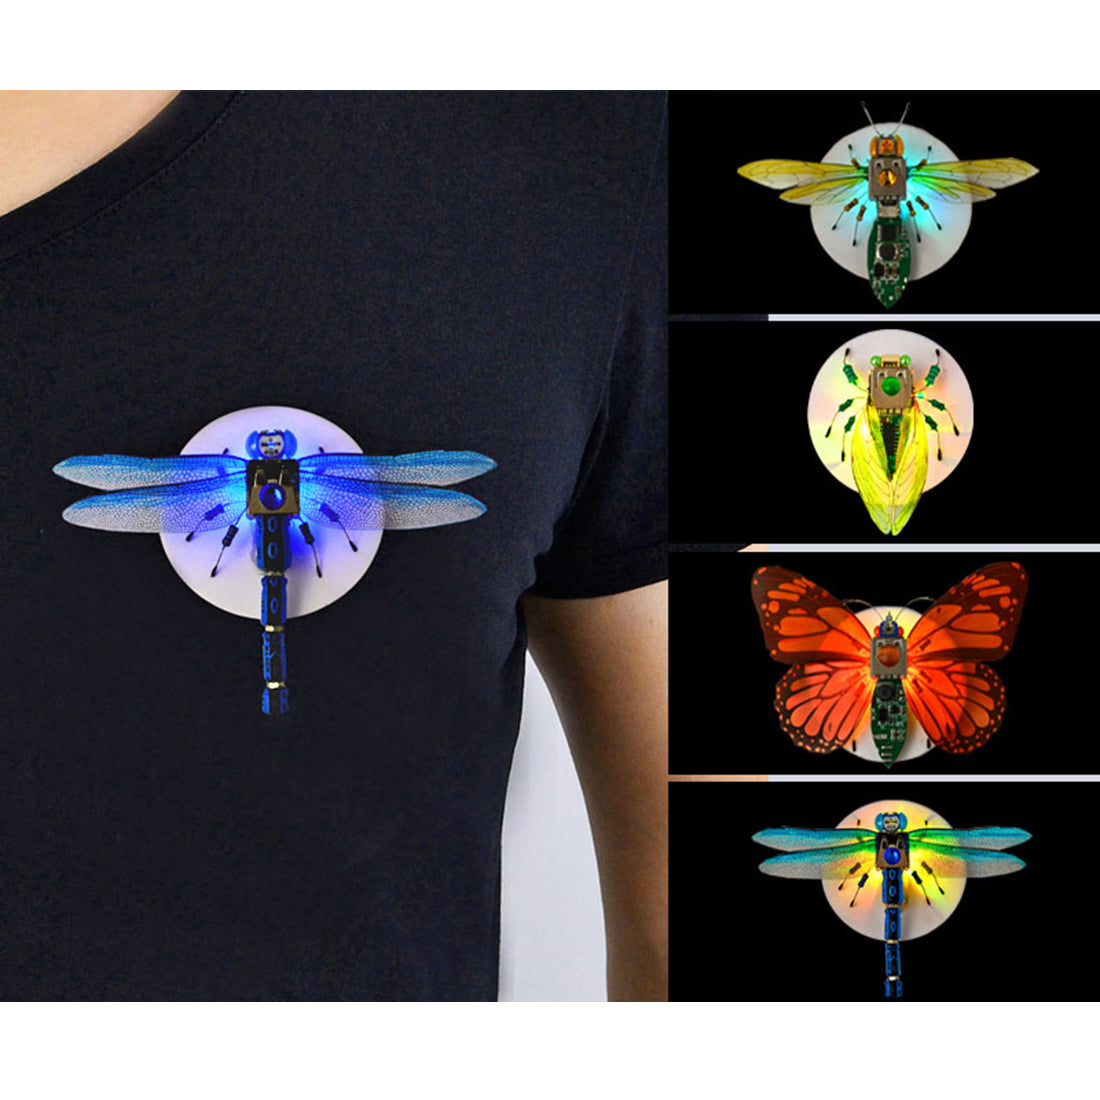 DIY Insect Kit Electronic Dragonfly Butterfly Cicada Vespa Handmade Model with LED Lights